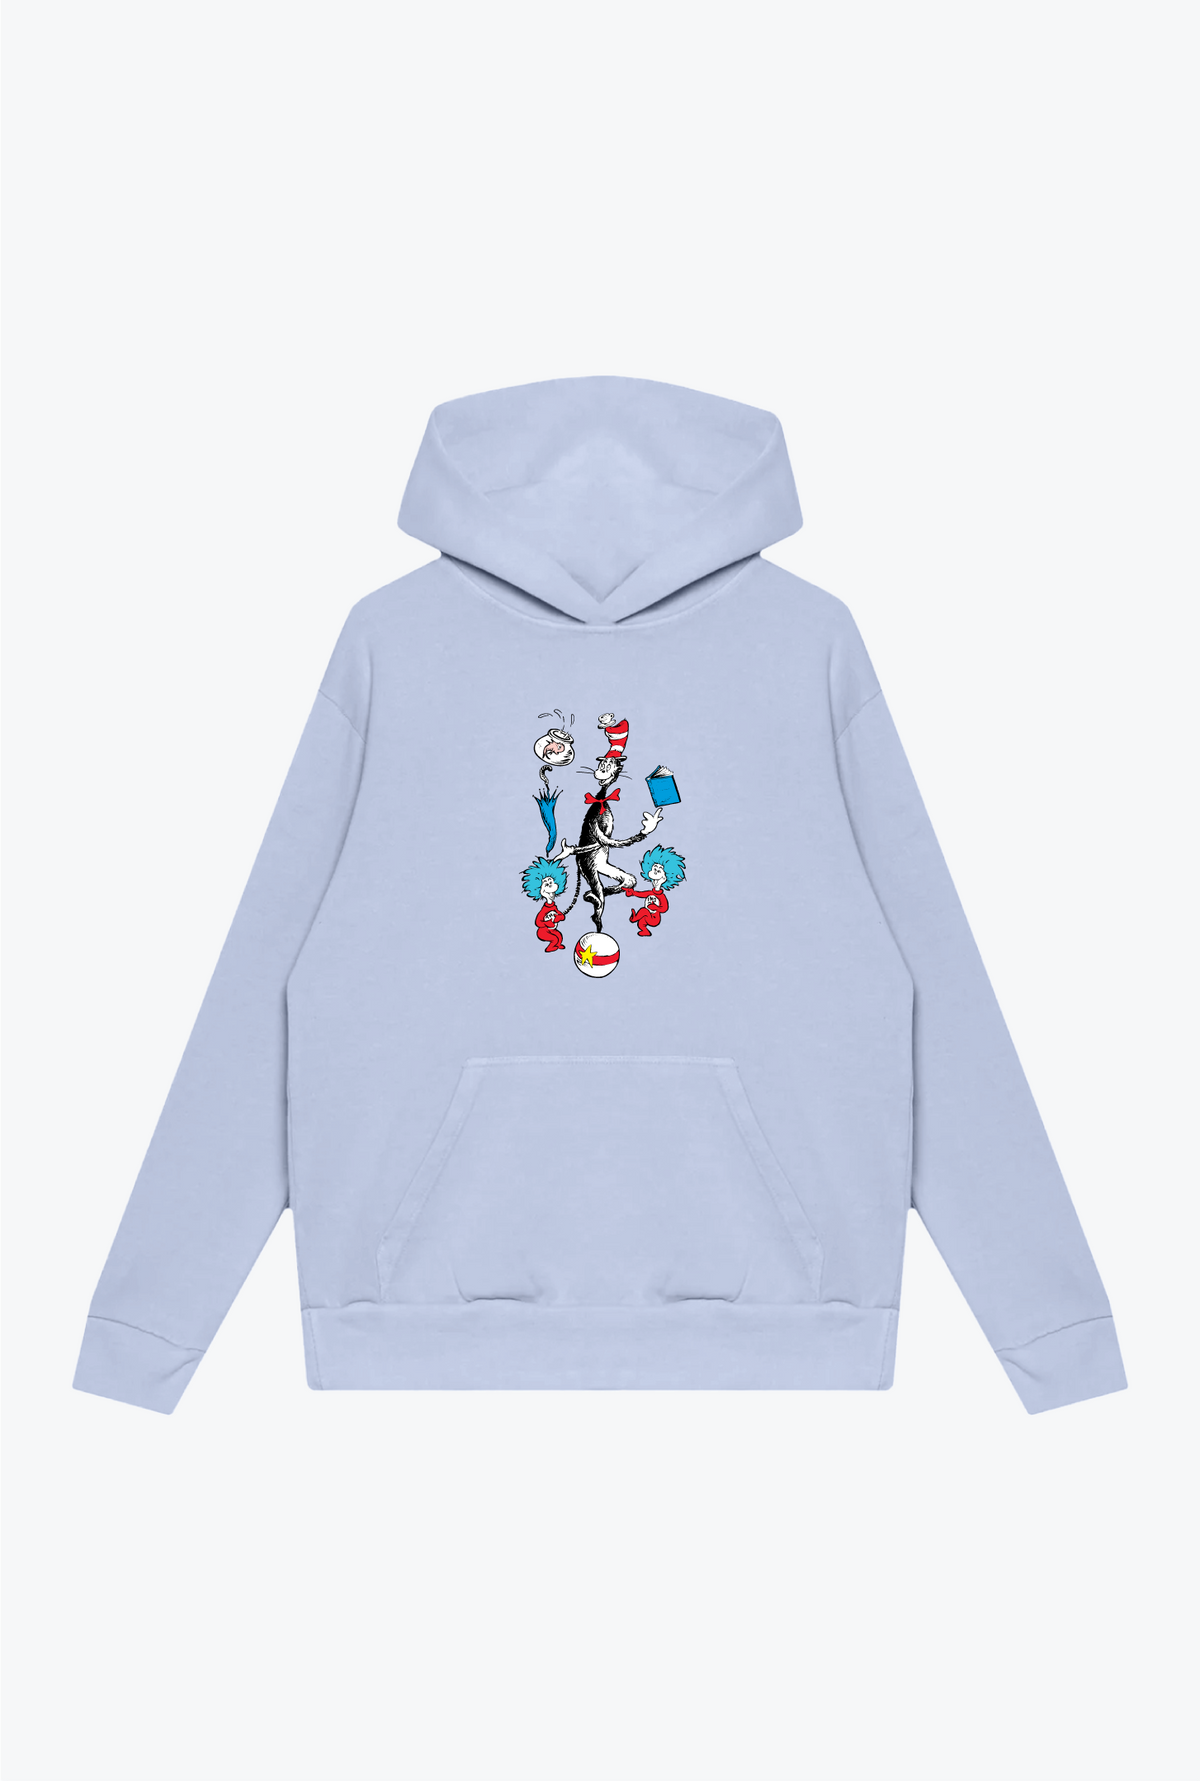 Cat In The Hat Vintage Character Hoodie - Grape Ice